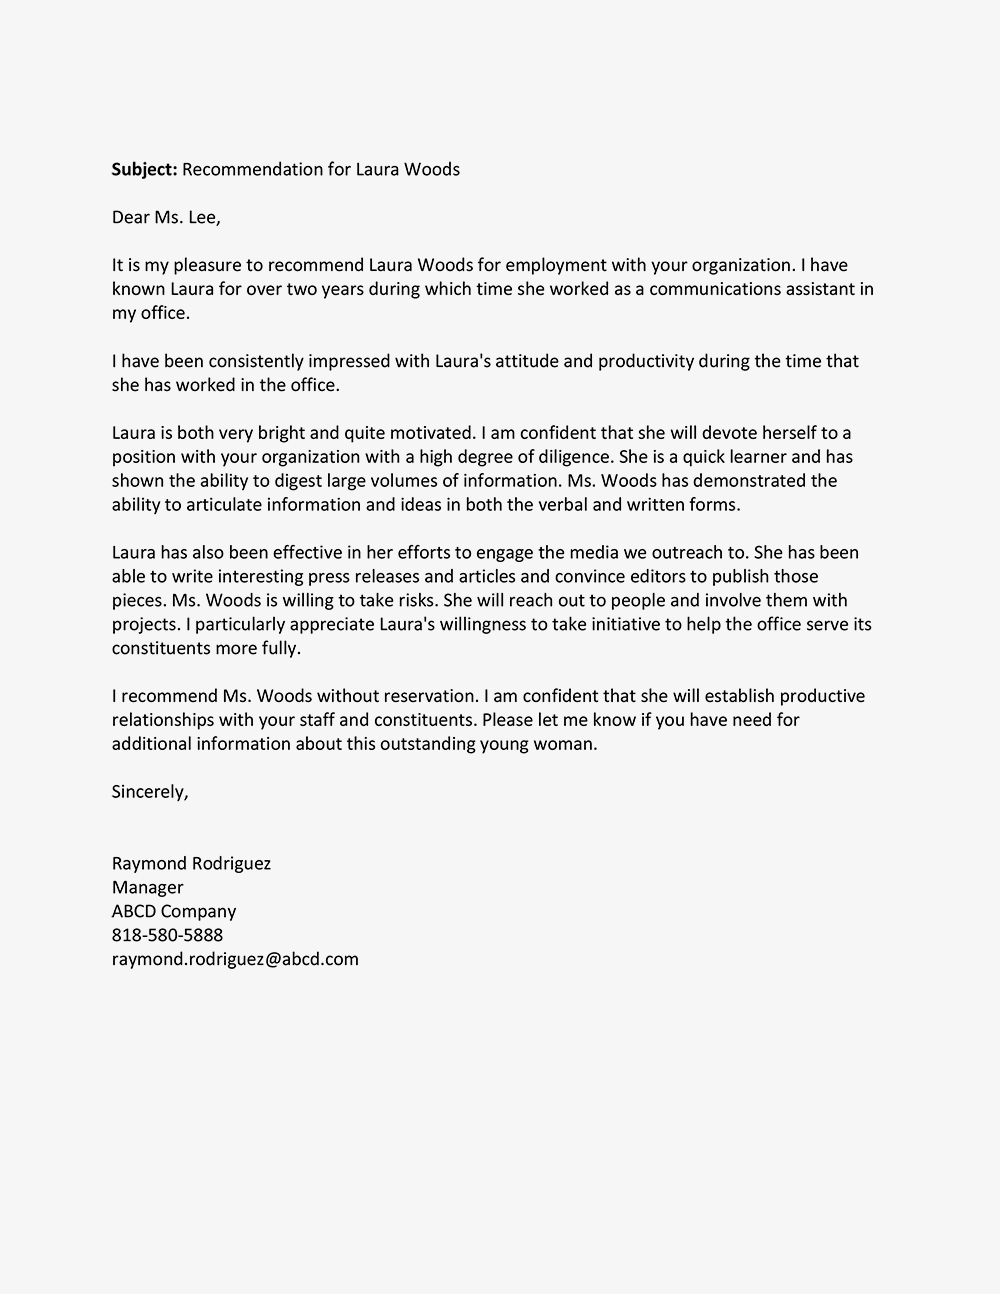 Reference Letter For Former Employee Debandje within dimensions 1000 X 1294